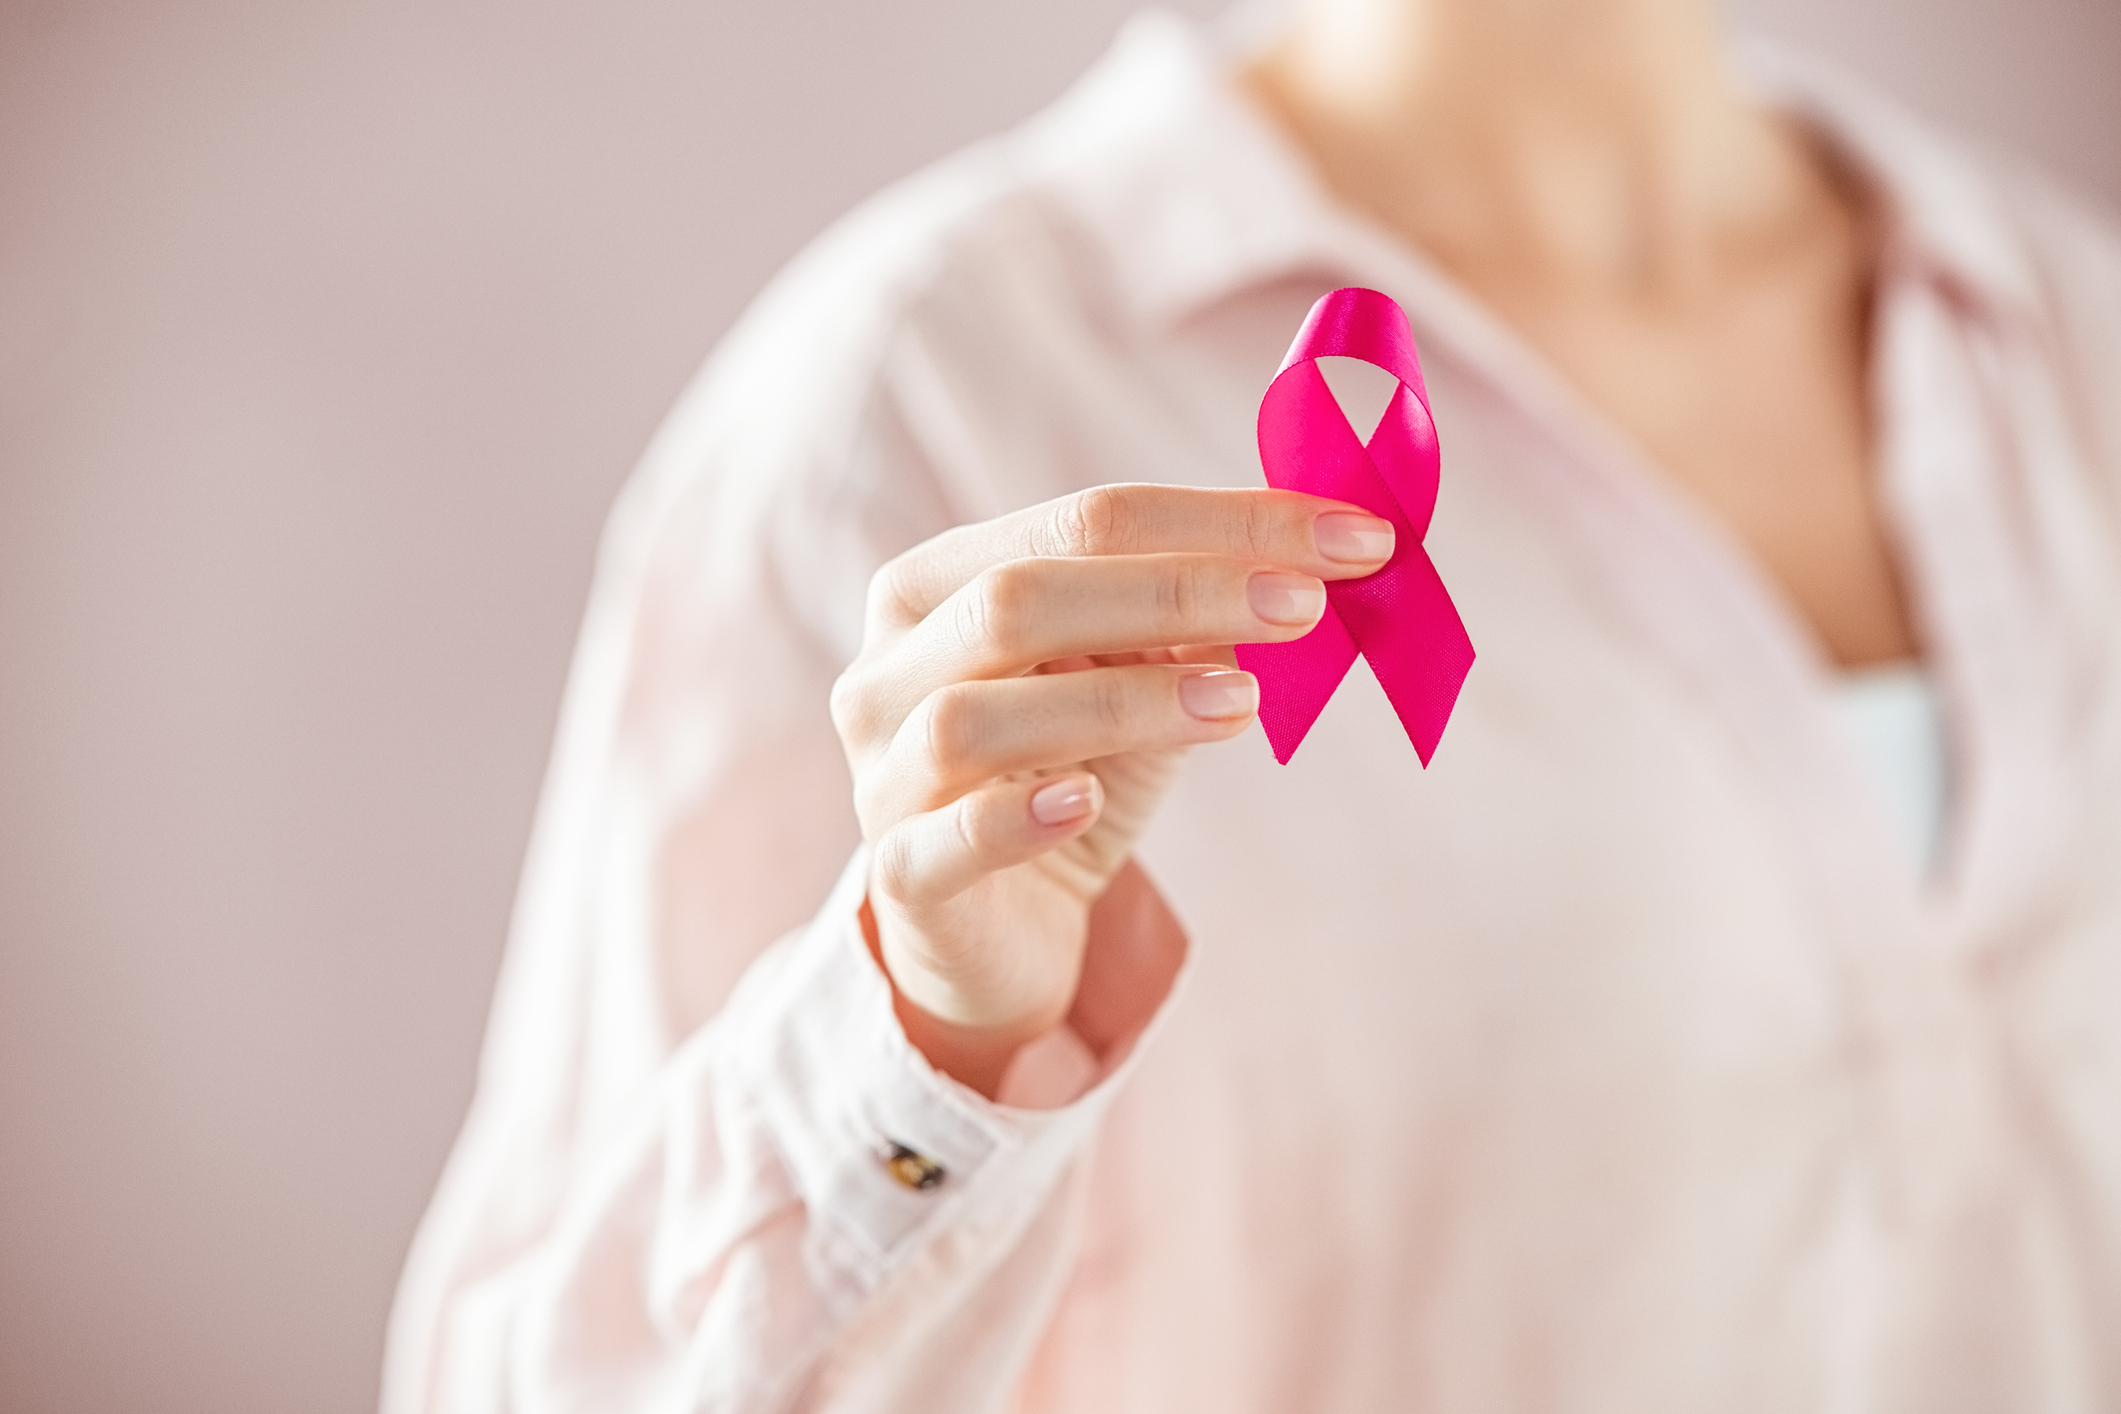 A nurse's breast cancer recognized as an occupational disease - Elle